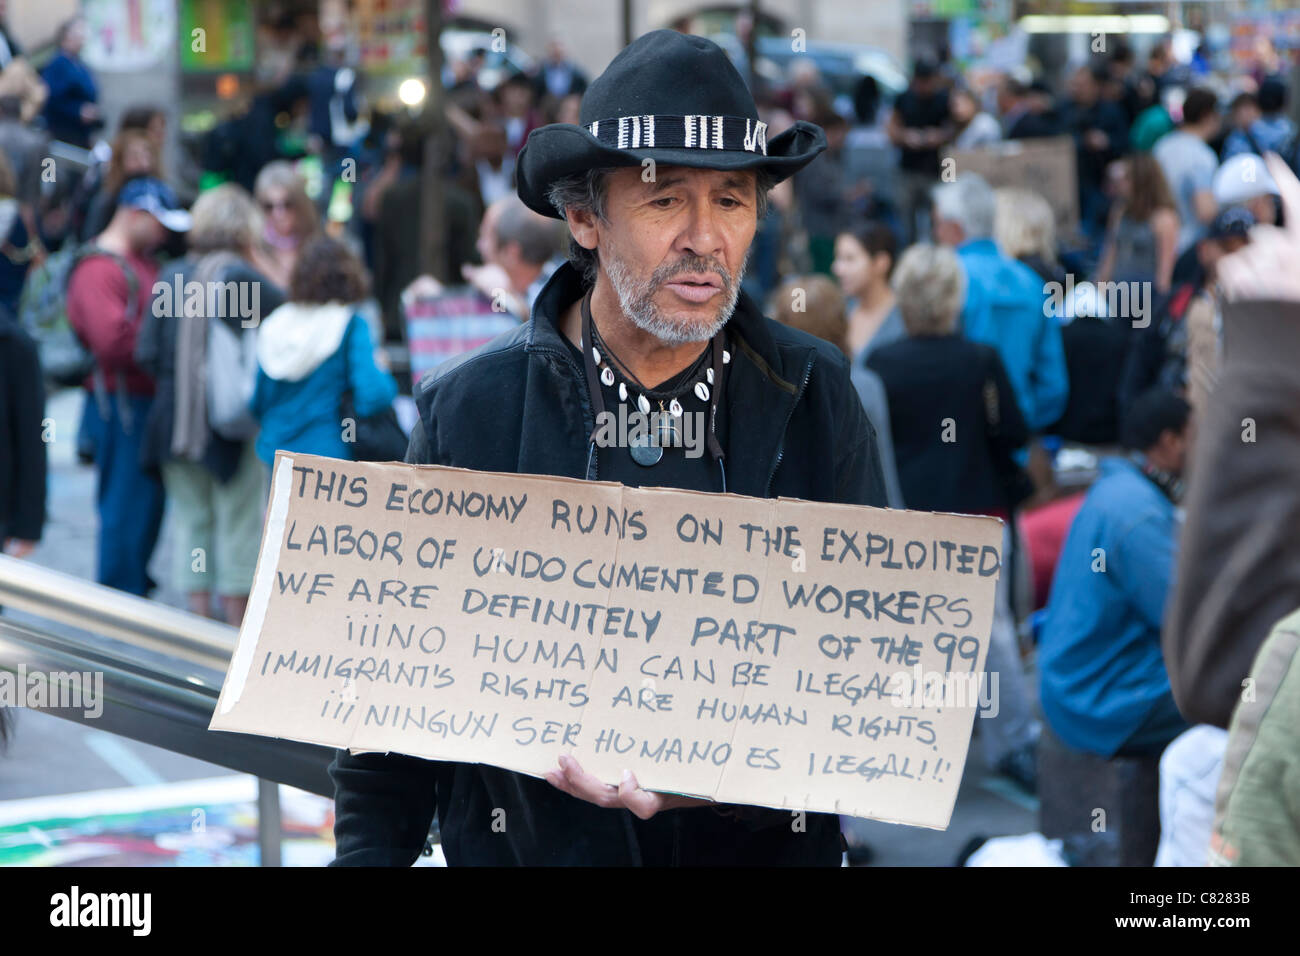 A man holds a protest sign in expressing concern for undocumented workers and immigrants during Occupy Wall Street demonstration Stock Photo